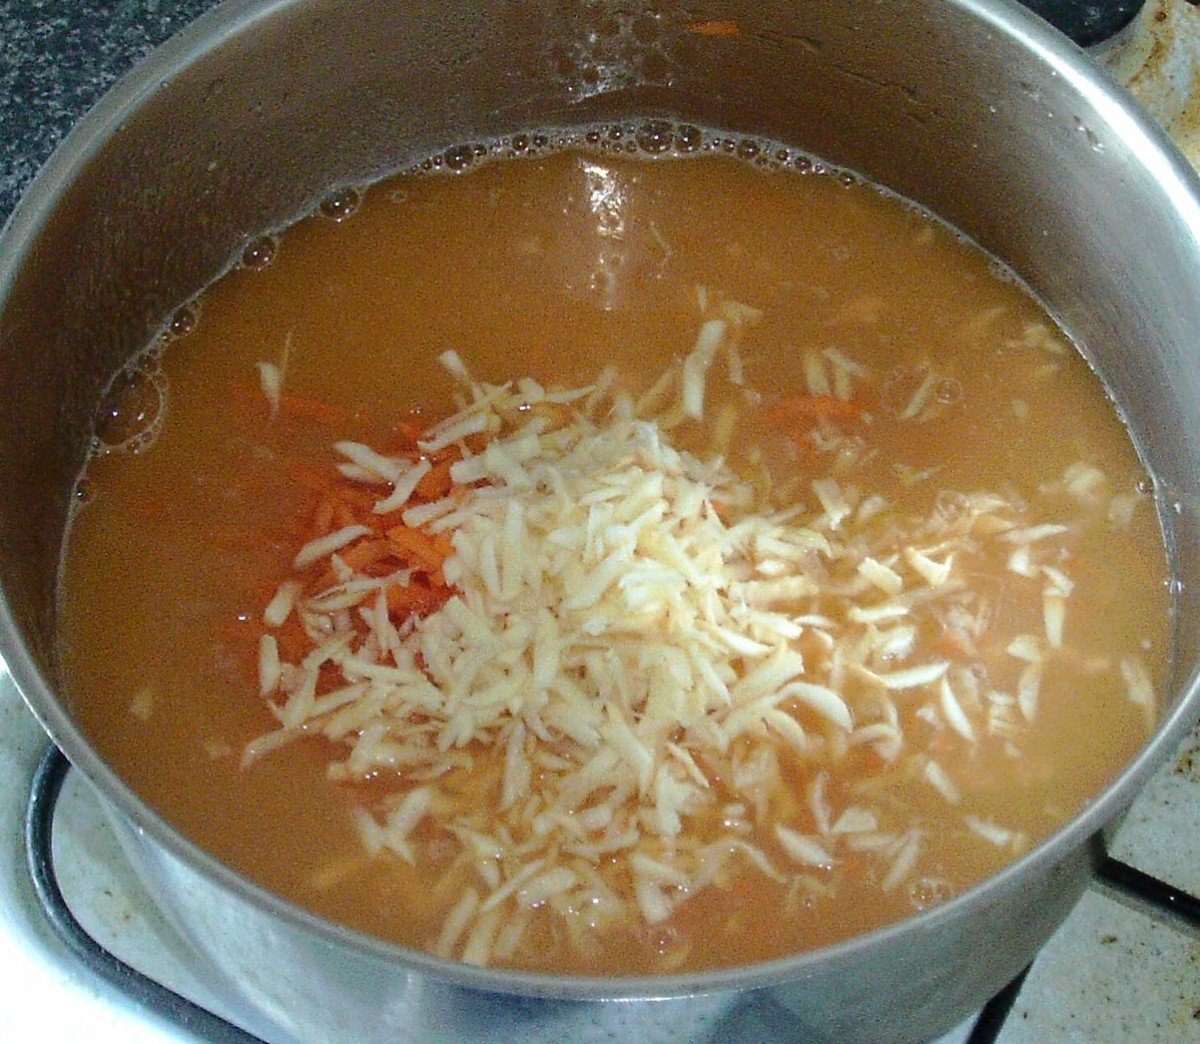 Carrot and parsnip is grated in to blended soup